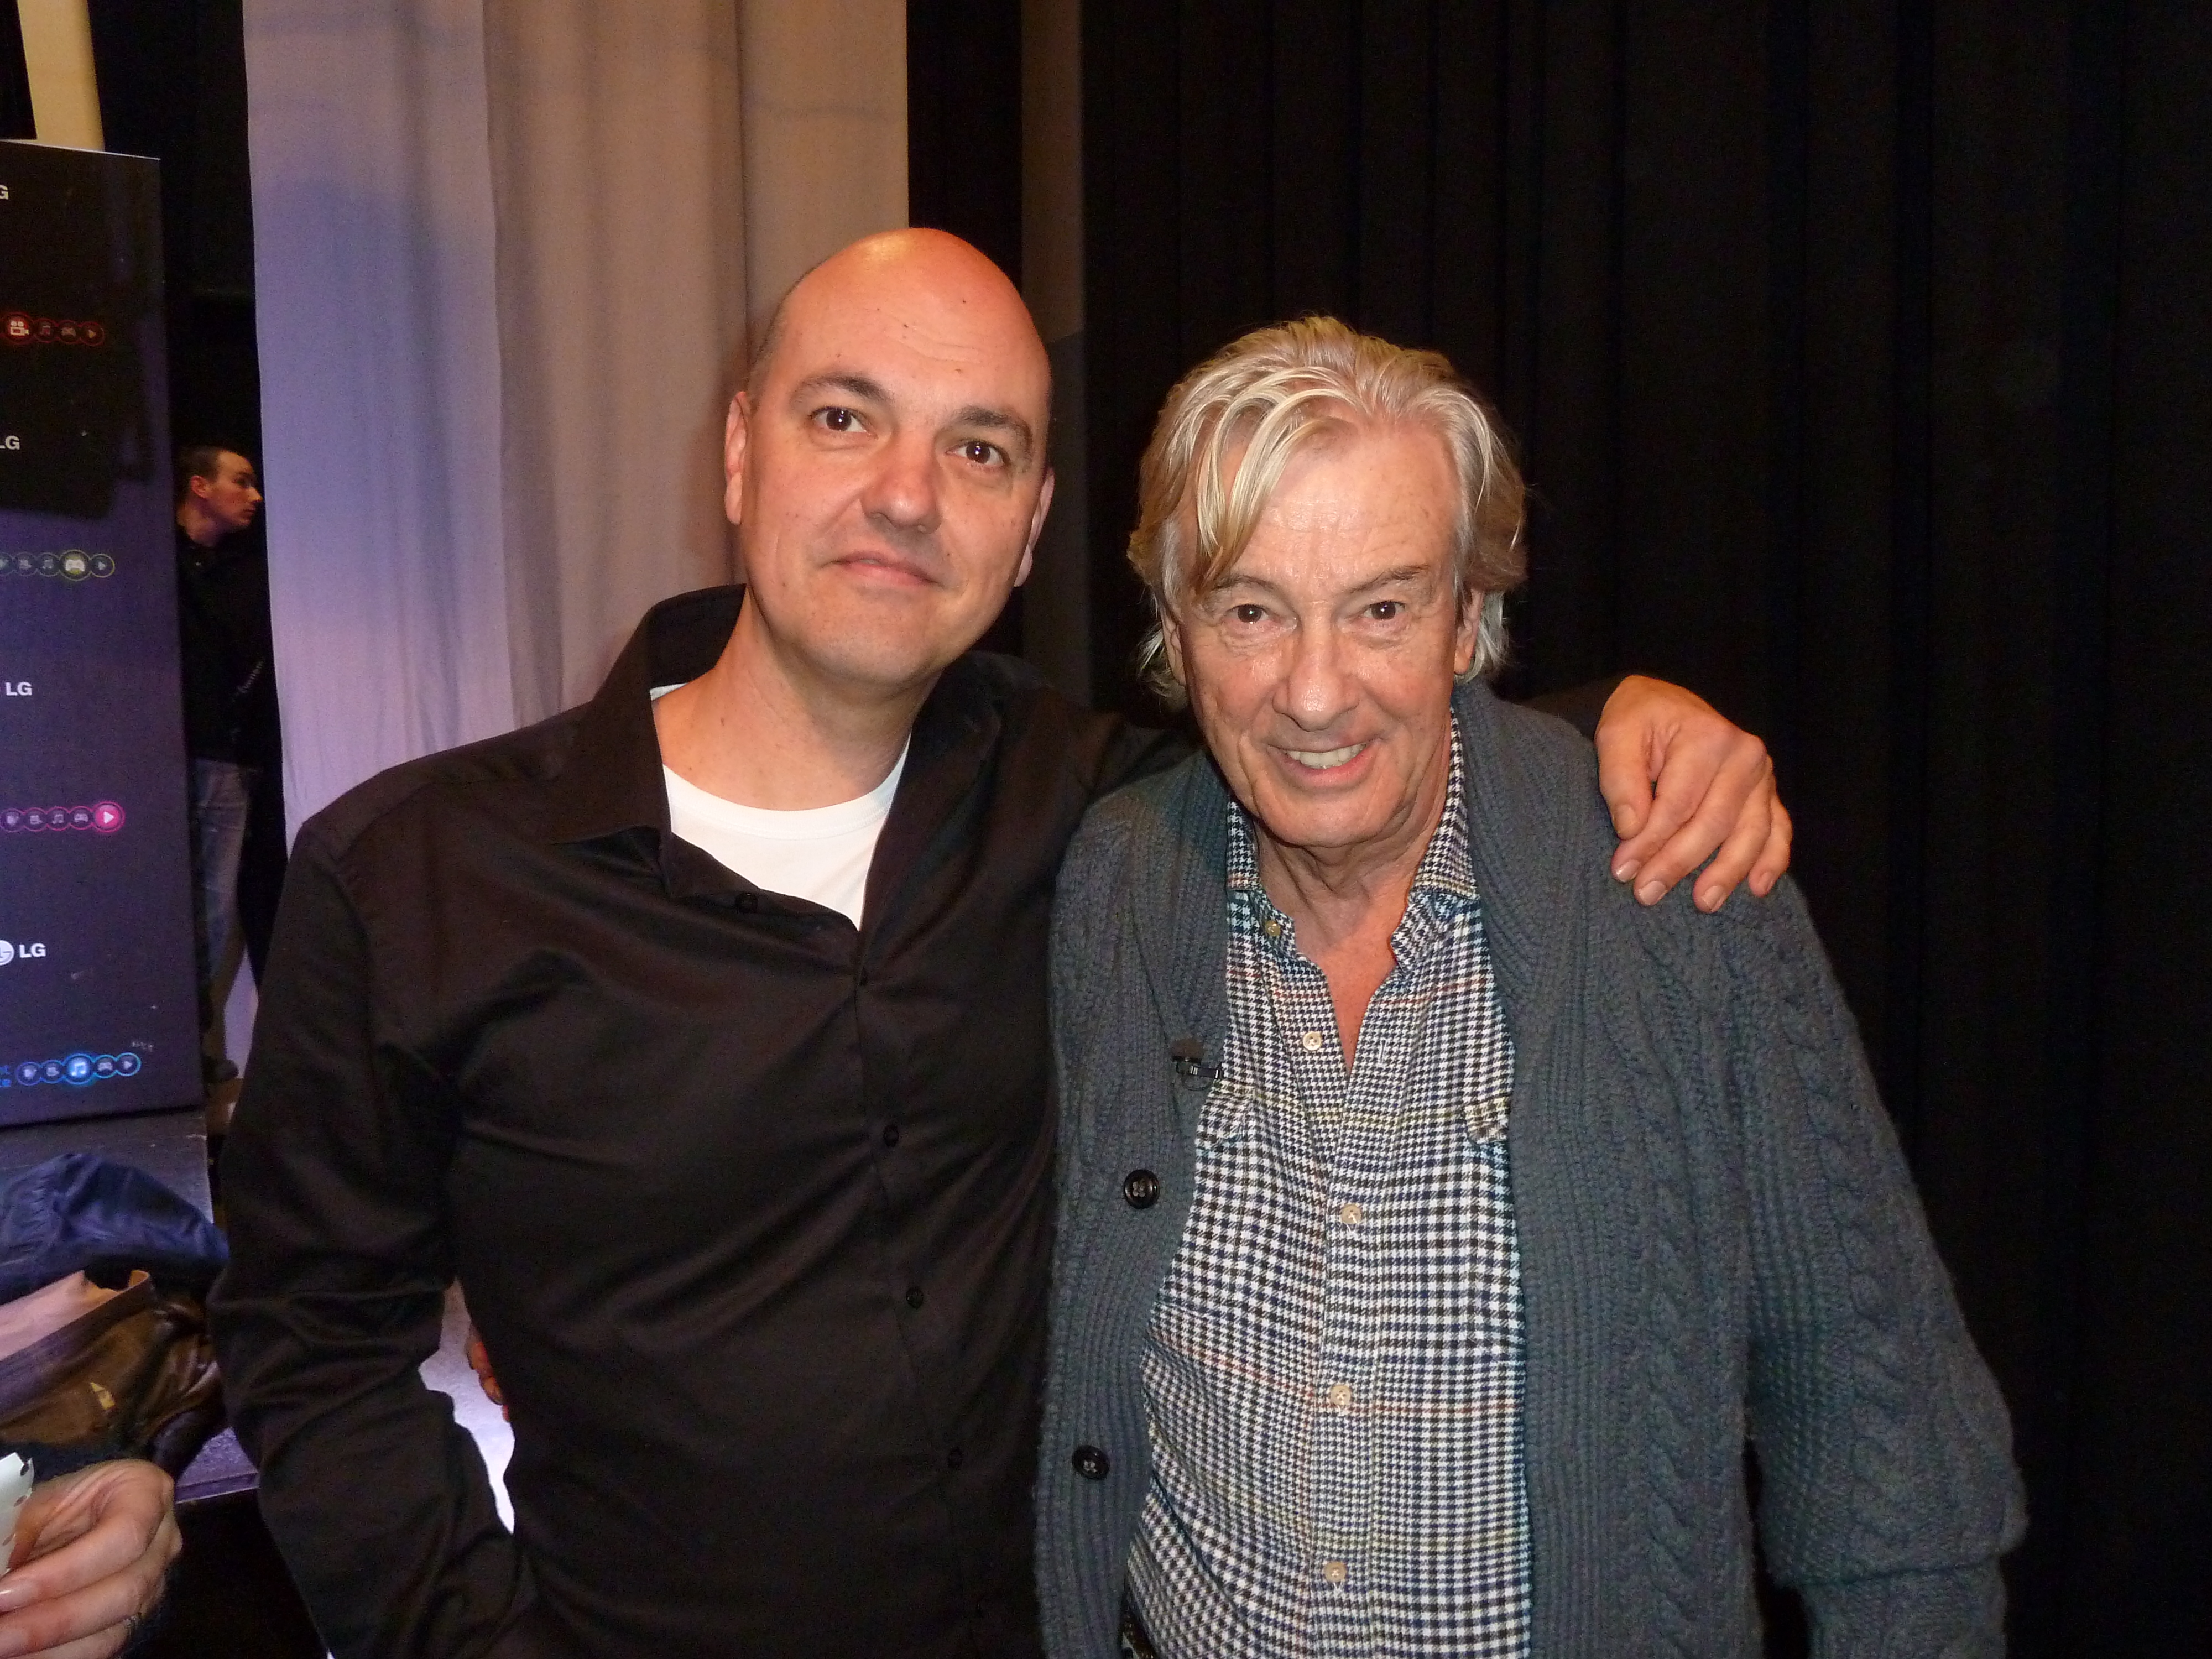 With Paul Verhoeven at the script writing workshop for The Entertainment Experience.